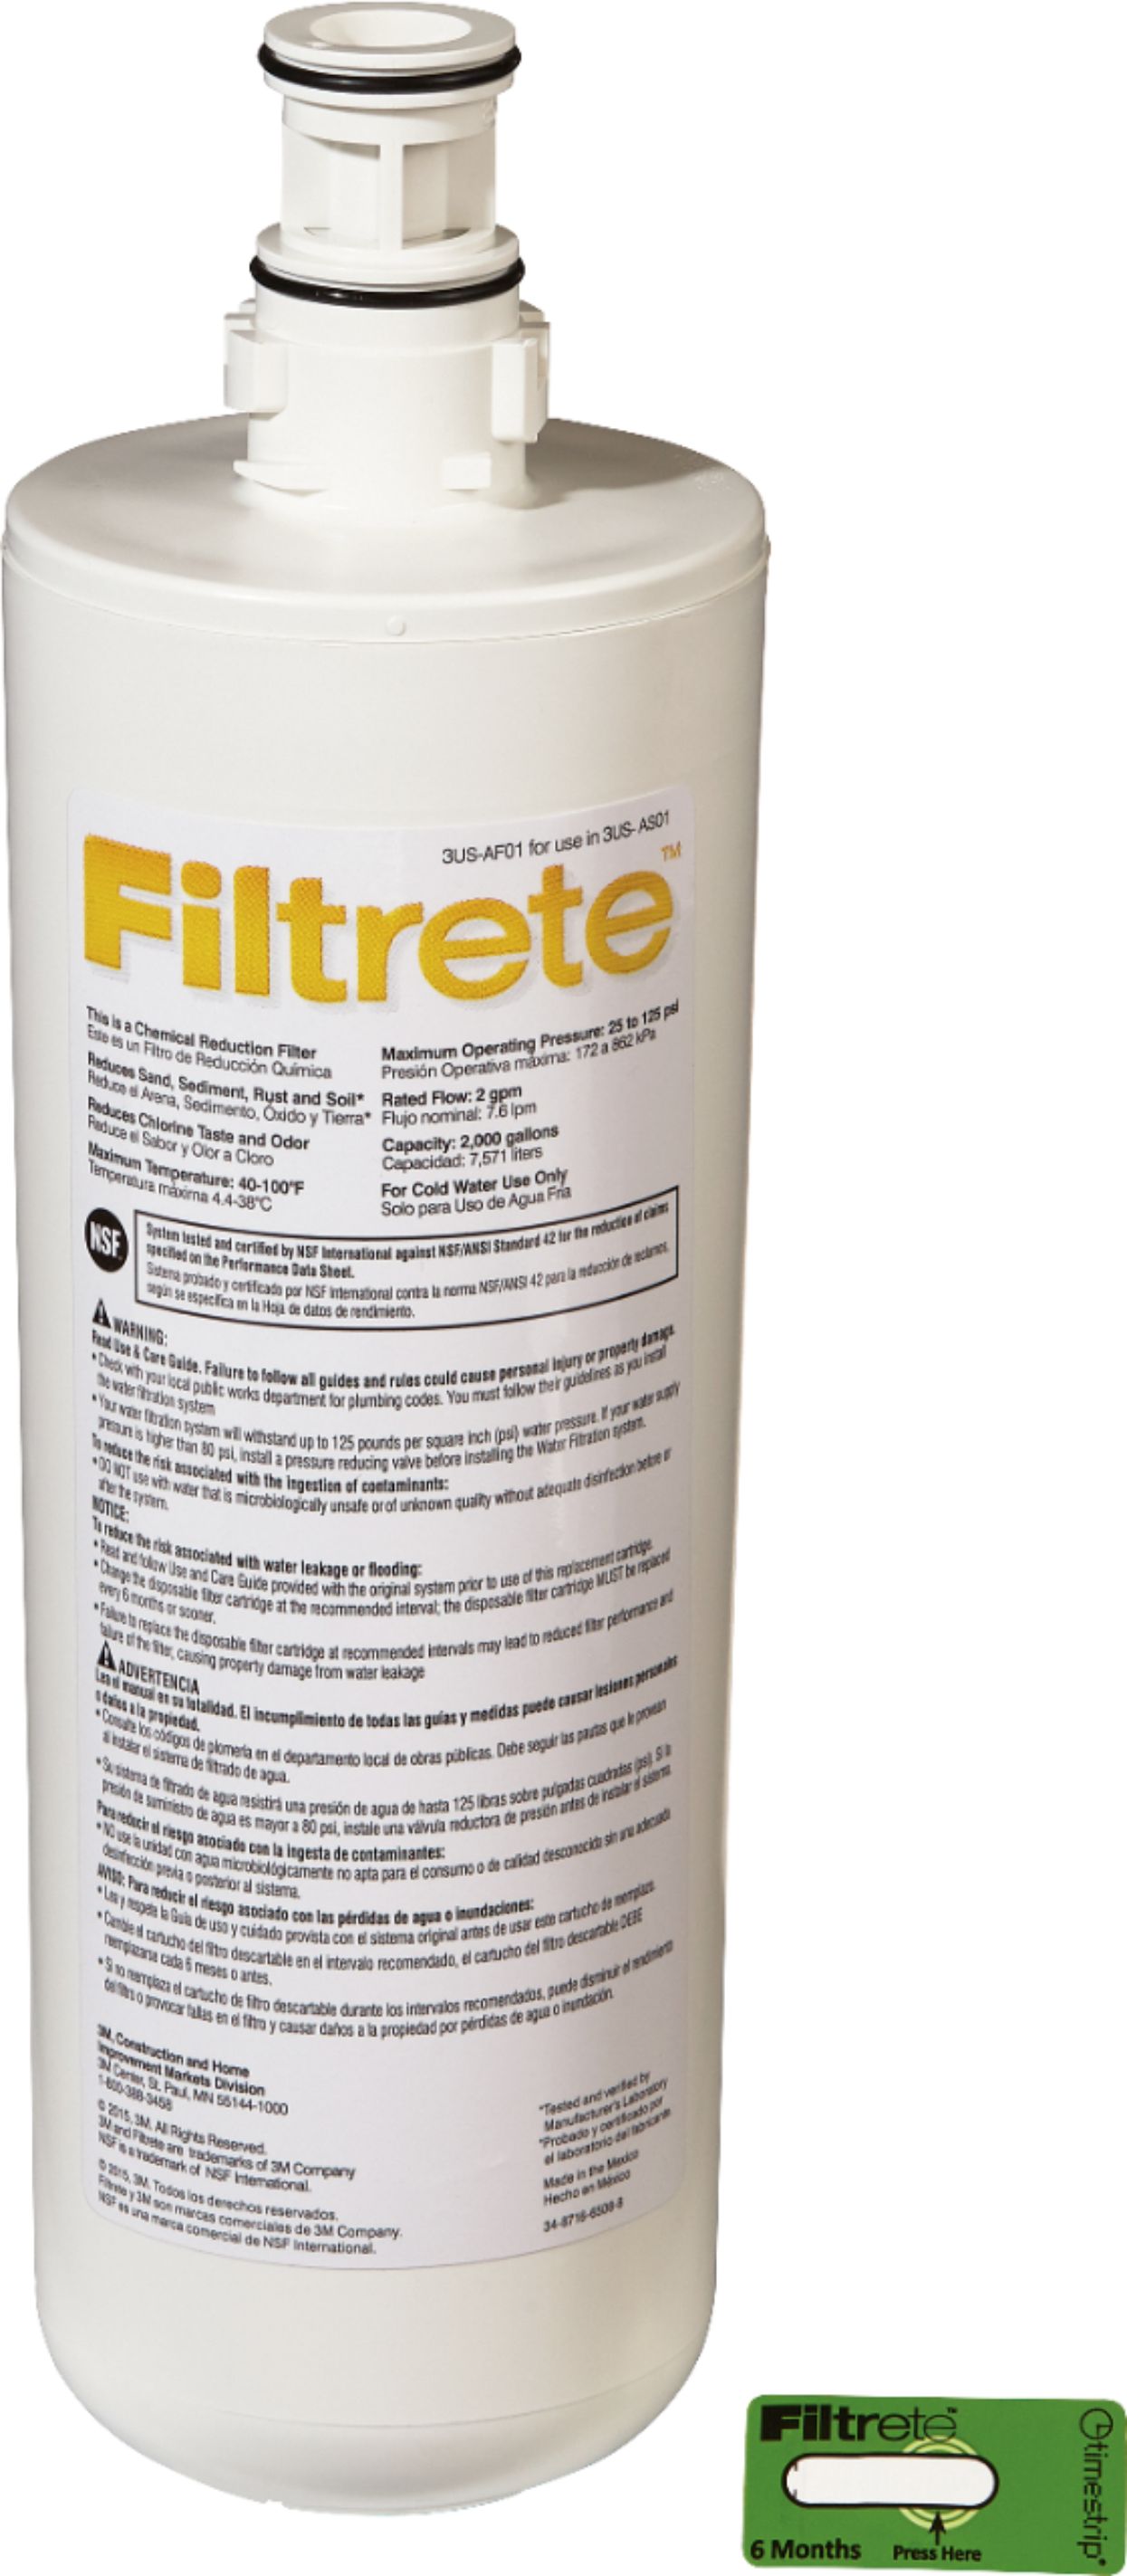 Filtrete - Standard Under Sink Quick Change Water Filtration Replacement Filter 3US-AF01 for use with 3US-AS01 System - White